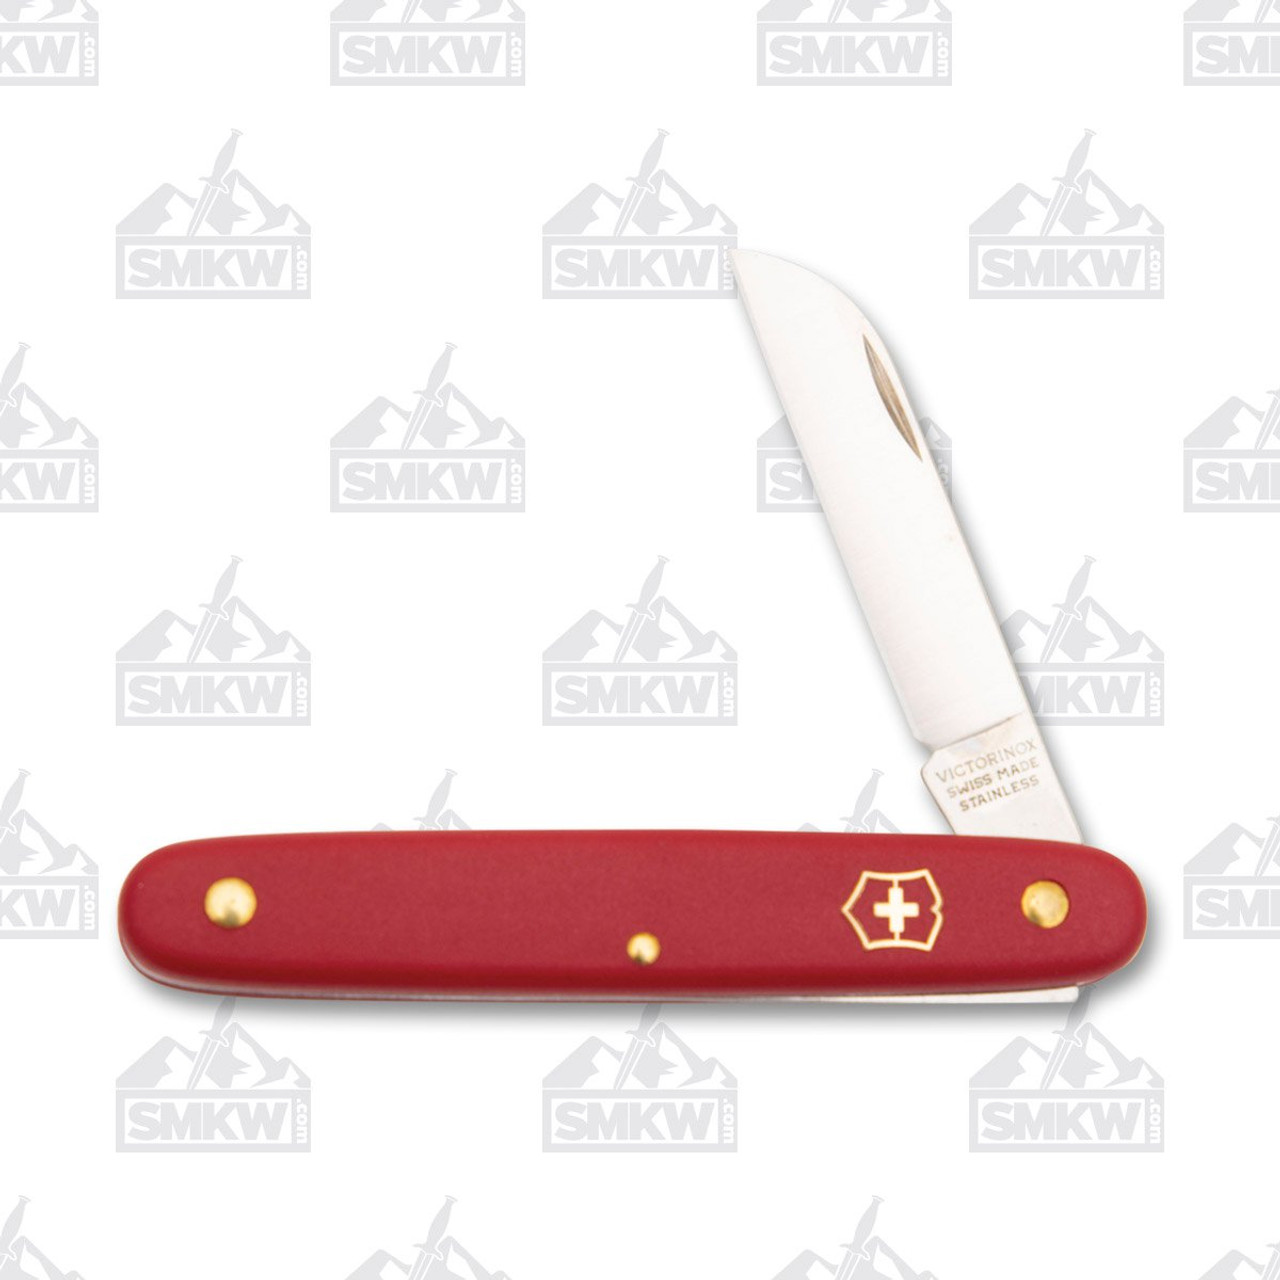 Victorinox Floral Knife Red - Smoky Mountain Knife Works